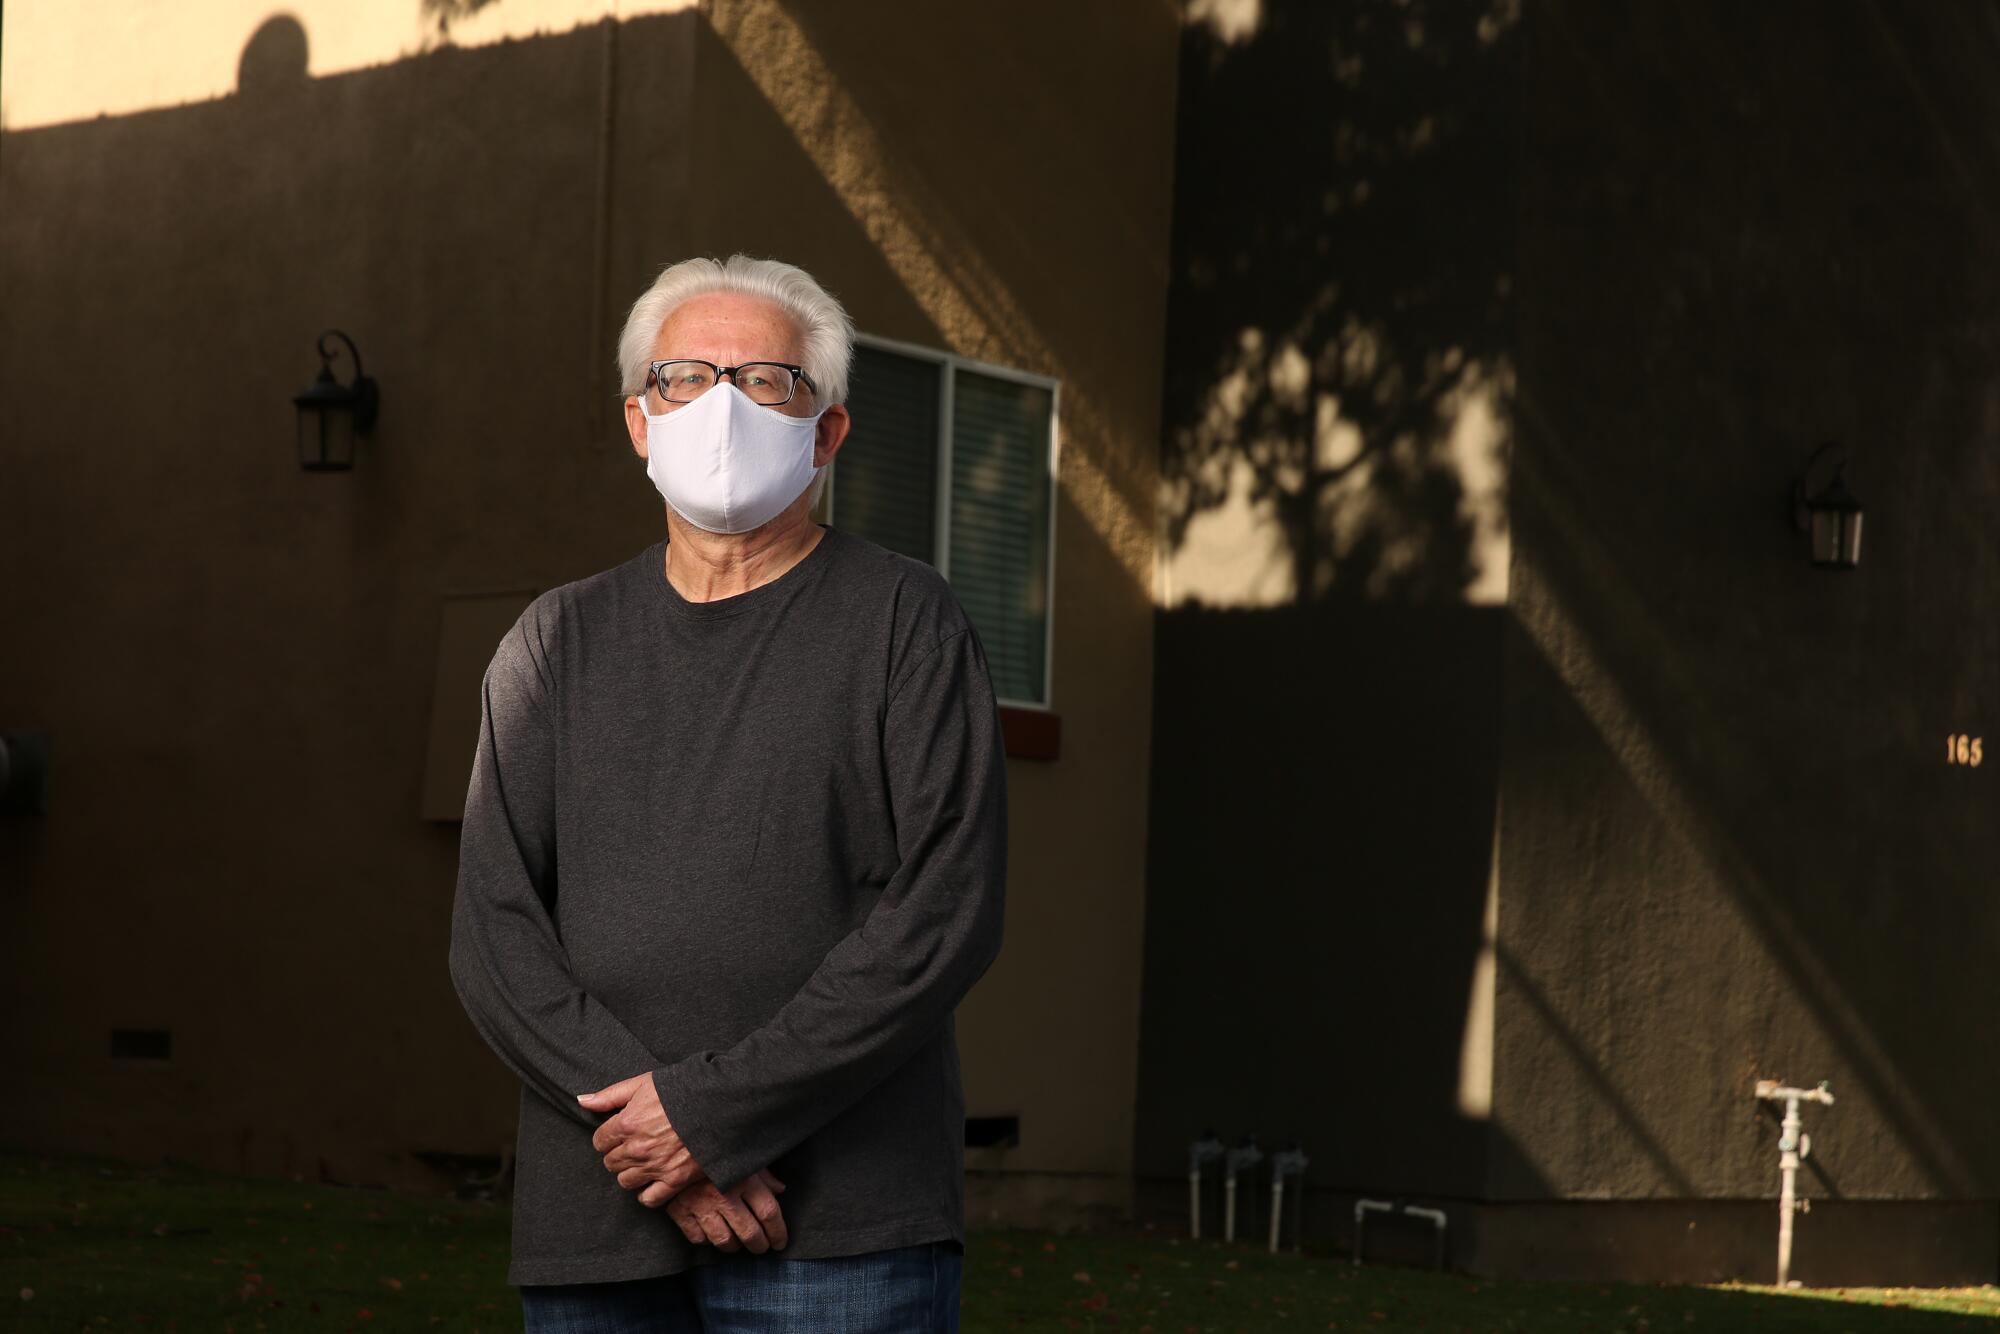 CASA volunteer Dave Stein poses for a portrait while wearing a mask